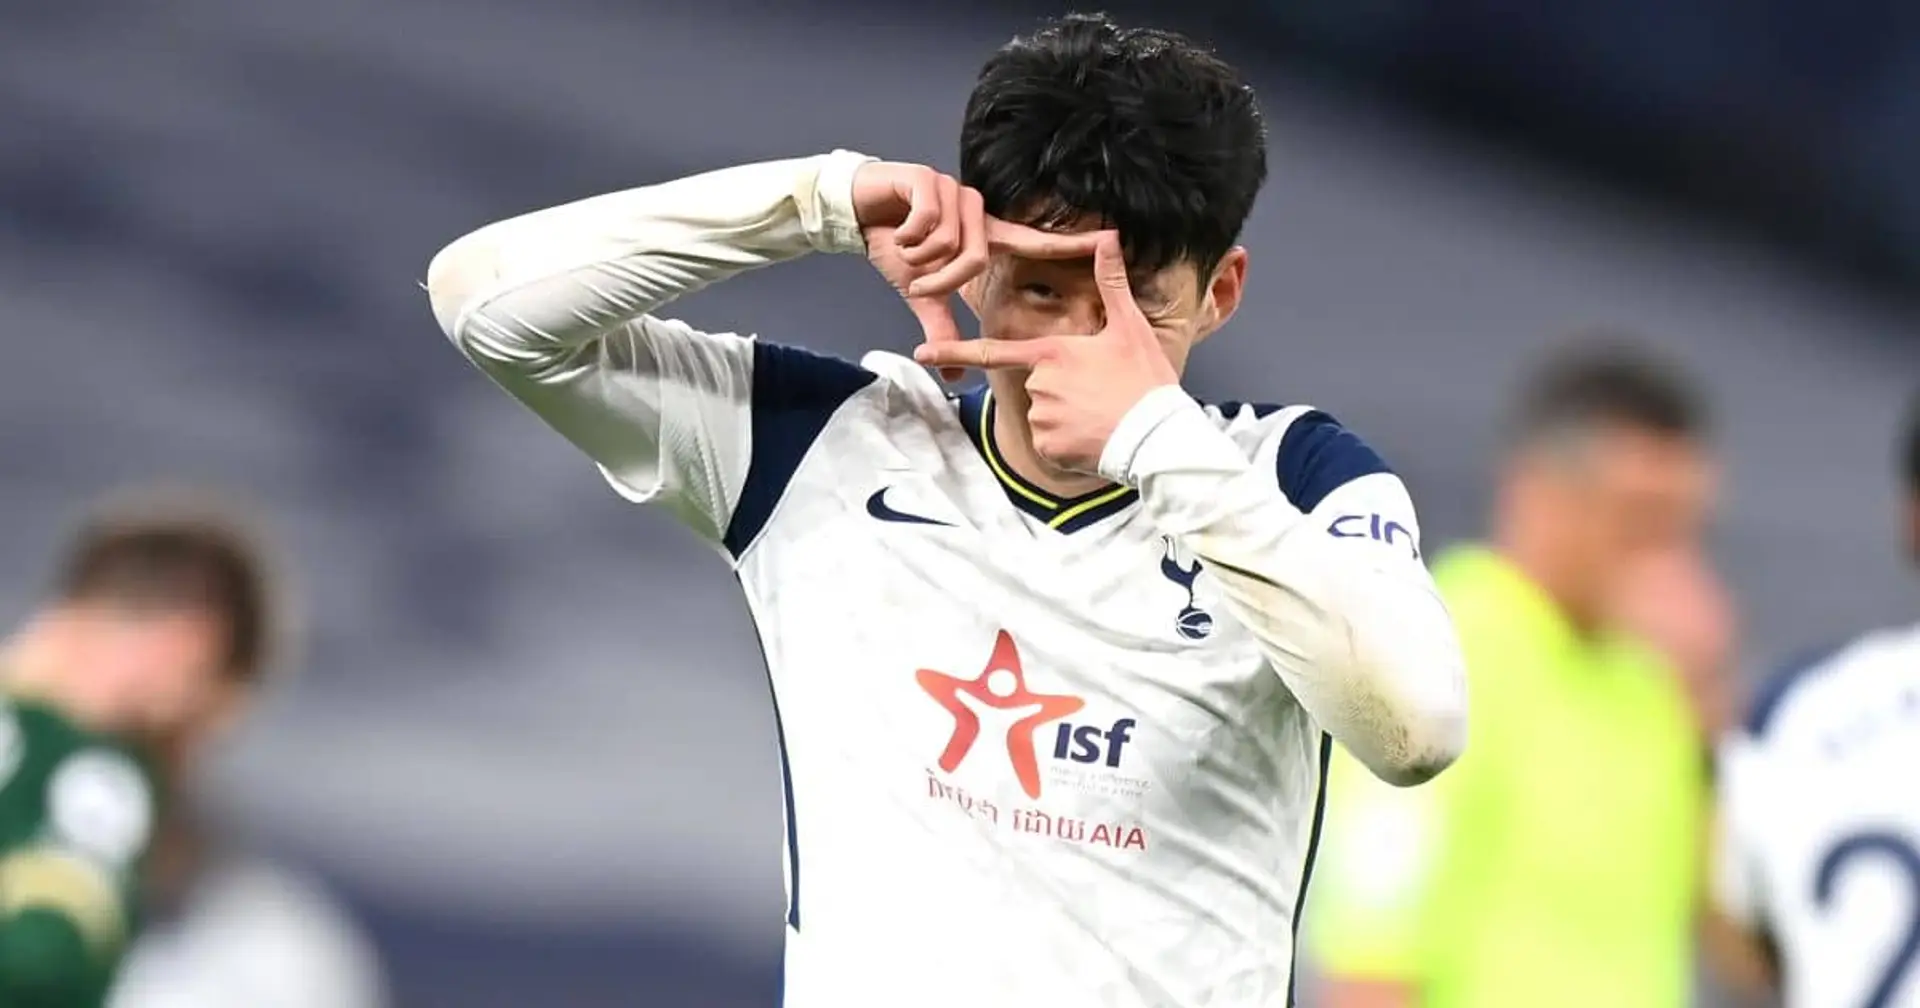 OFFICIAL: Son Heung-Min Son signs new Spurs deal